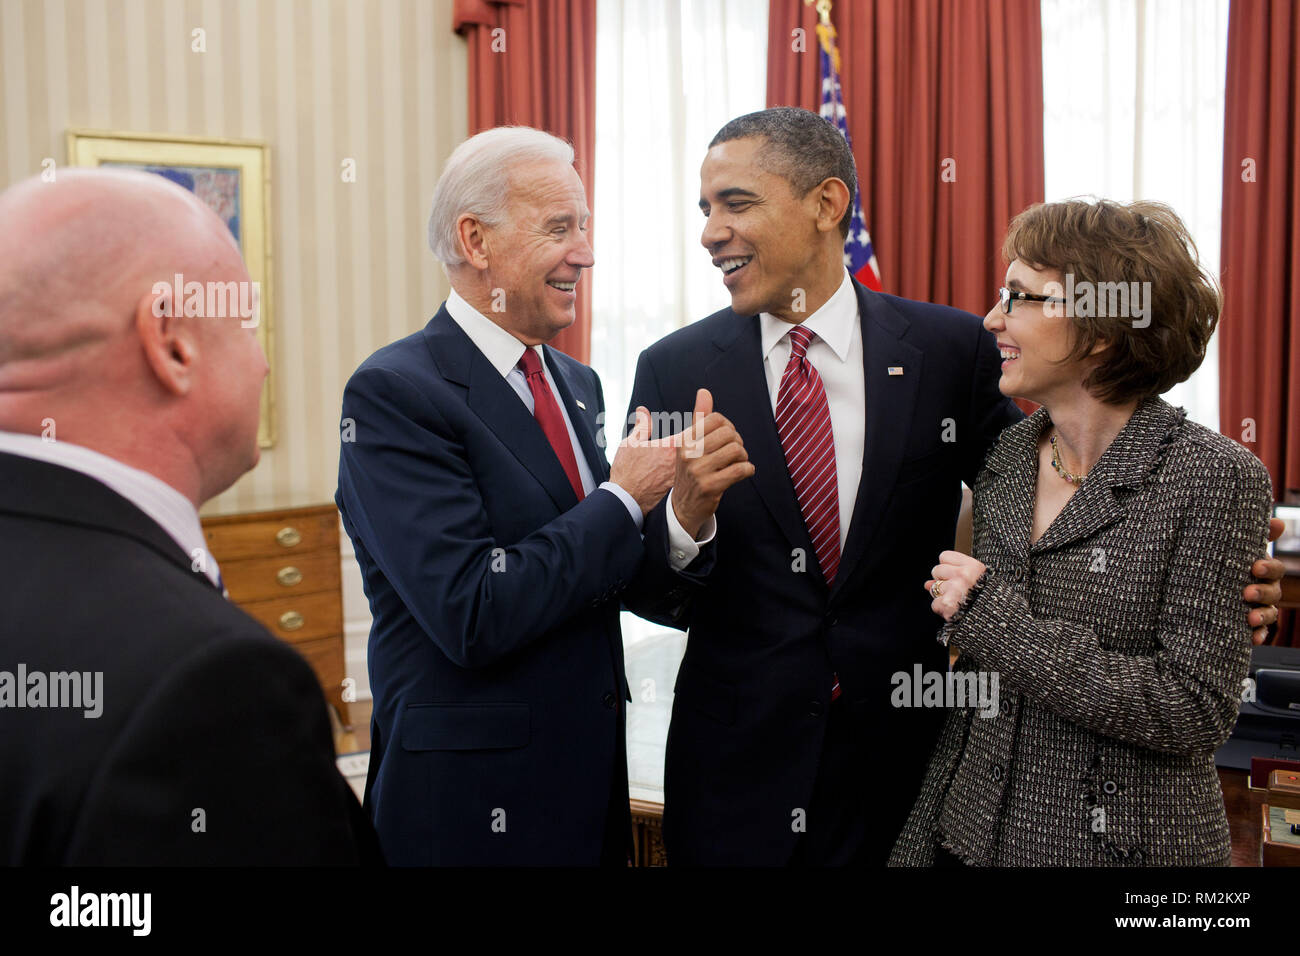 United States President Barack Obama and Vice President Joe Biden talk with former U.S. Representative Gabrielle Giffords (Democrat of Arizona) and her husband, Mark Kelly, after the President signed H.R. 3801, the Ultralight Aircraft Smuggling Prevention Act of 2012, in the Oval Office, February 10, 2012. The bill was the last piece of legislation that Giffords sponsored and voted on in the U.S. House of Representatives. .Mandatory Credit: Pete Souza - White House via CNP /MediaPunch Stock Photo